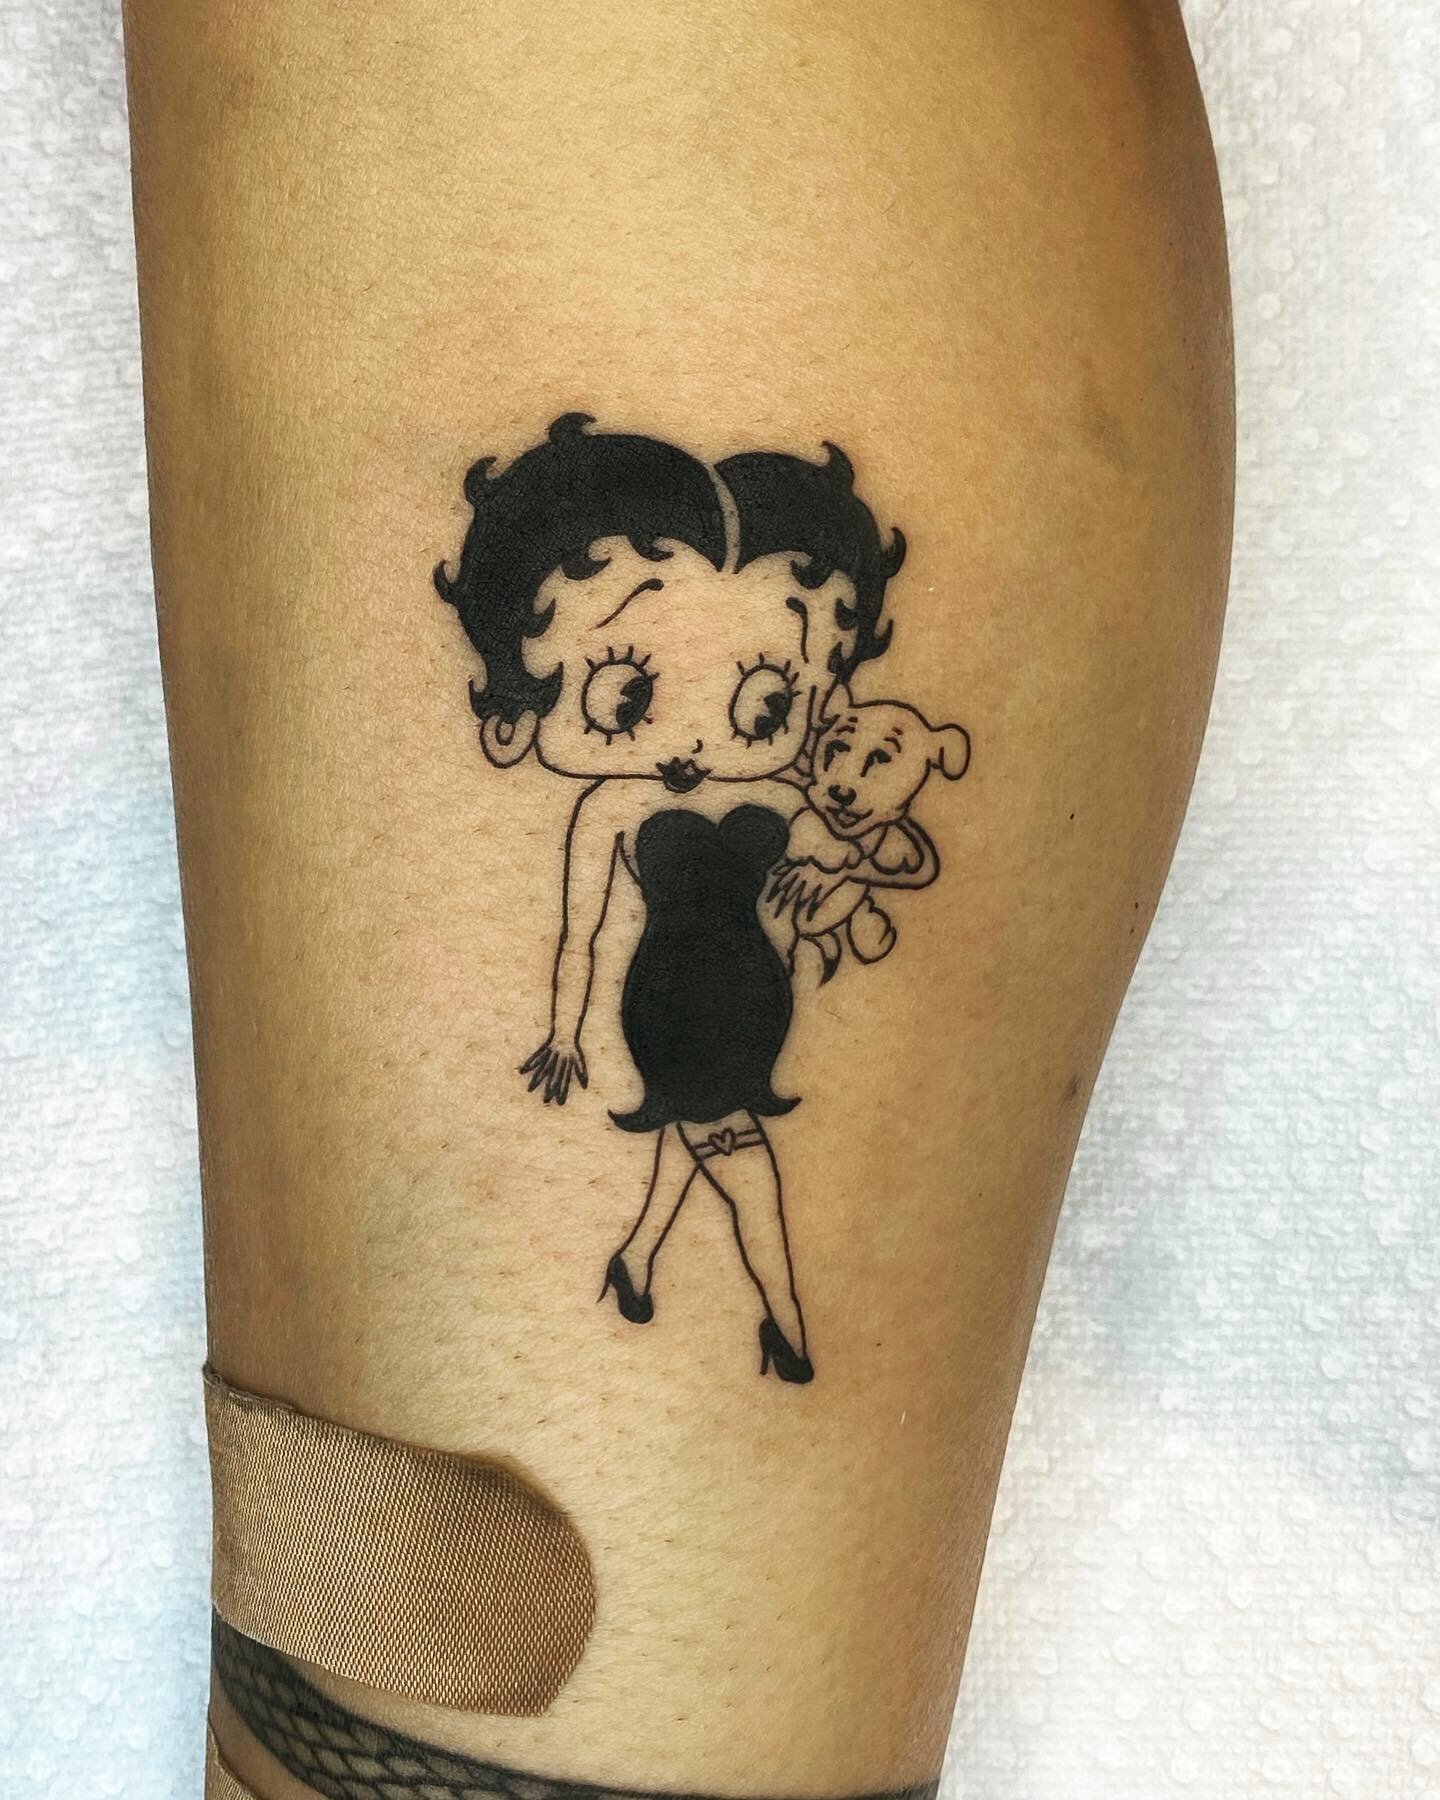 lil betty boop &amp; her pup. thanks for coming back jai!

done at @familytattoo